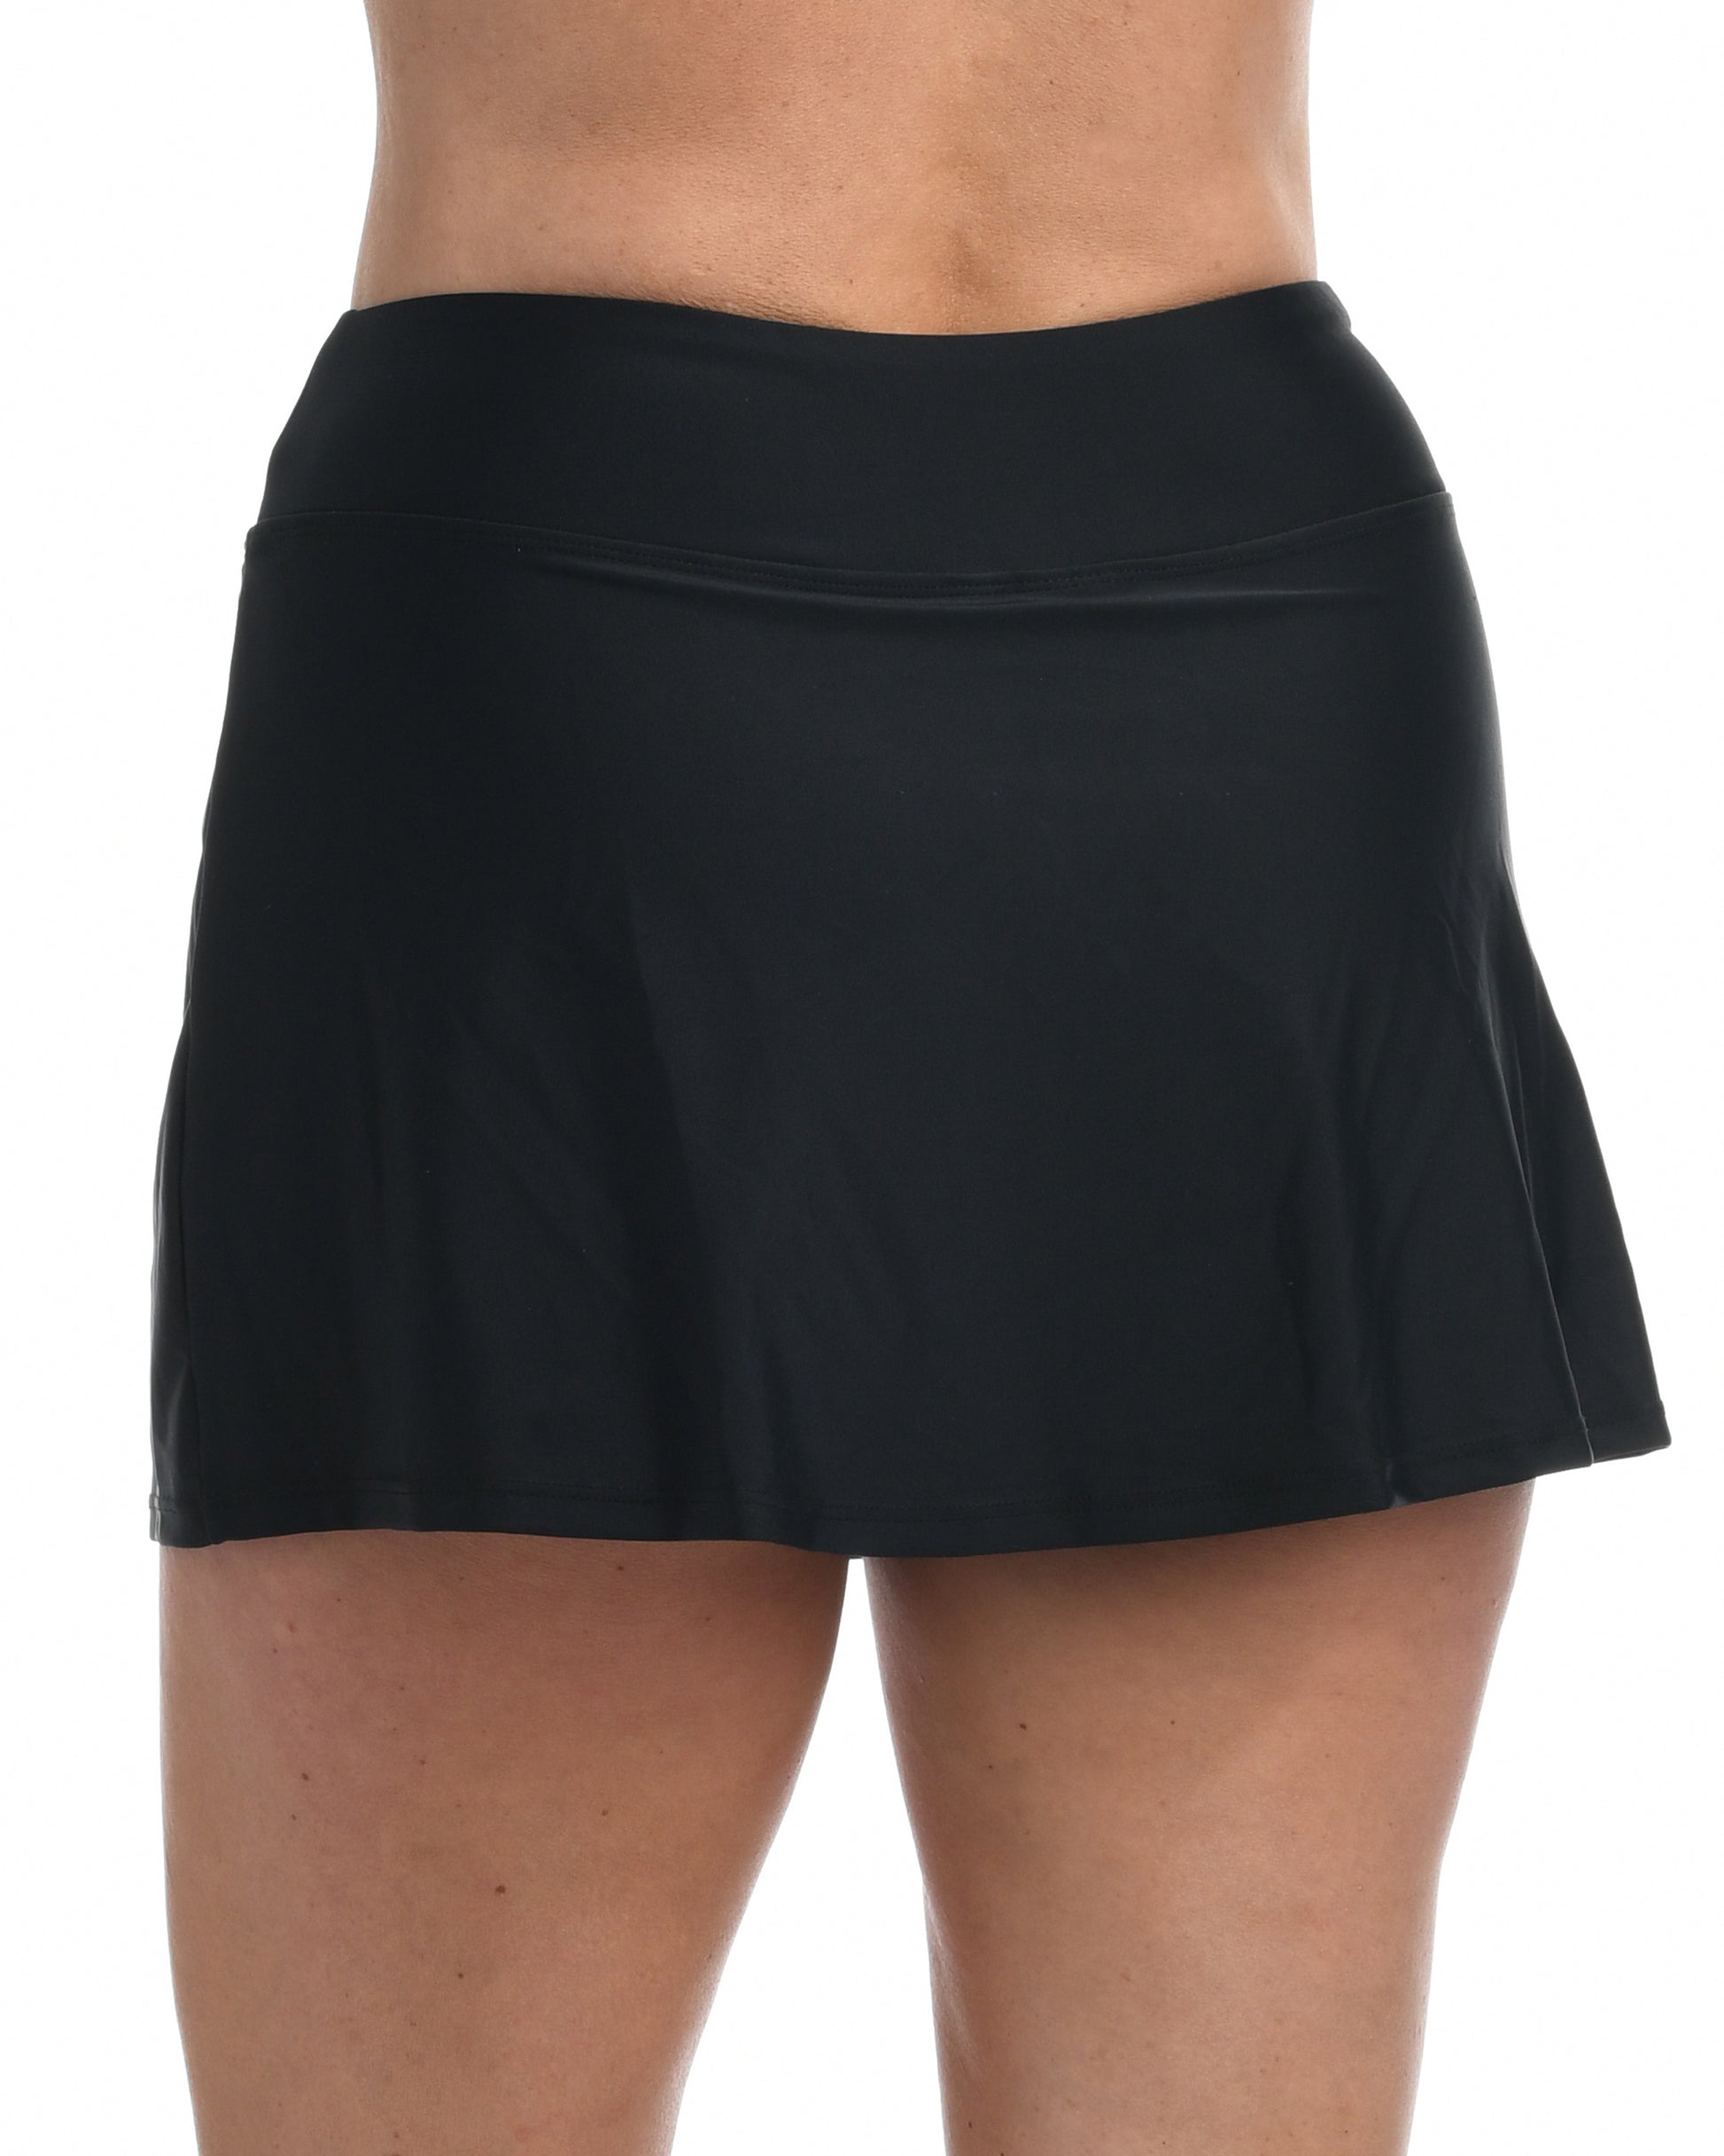 Model wearing a swim skirt with shorts underneath in black 